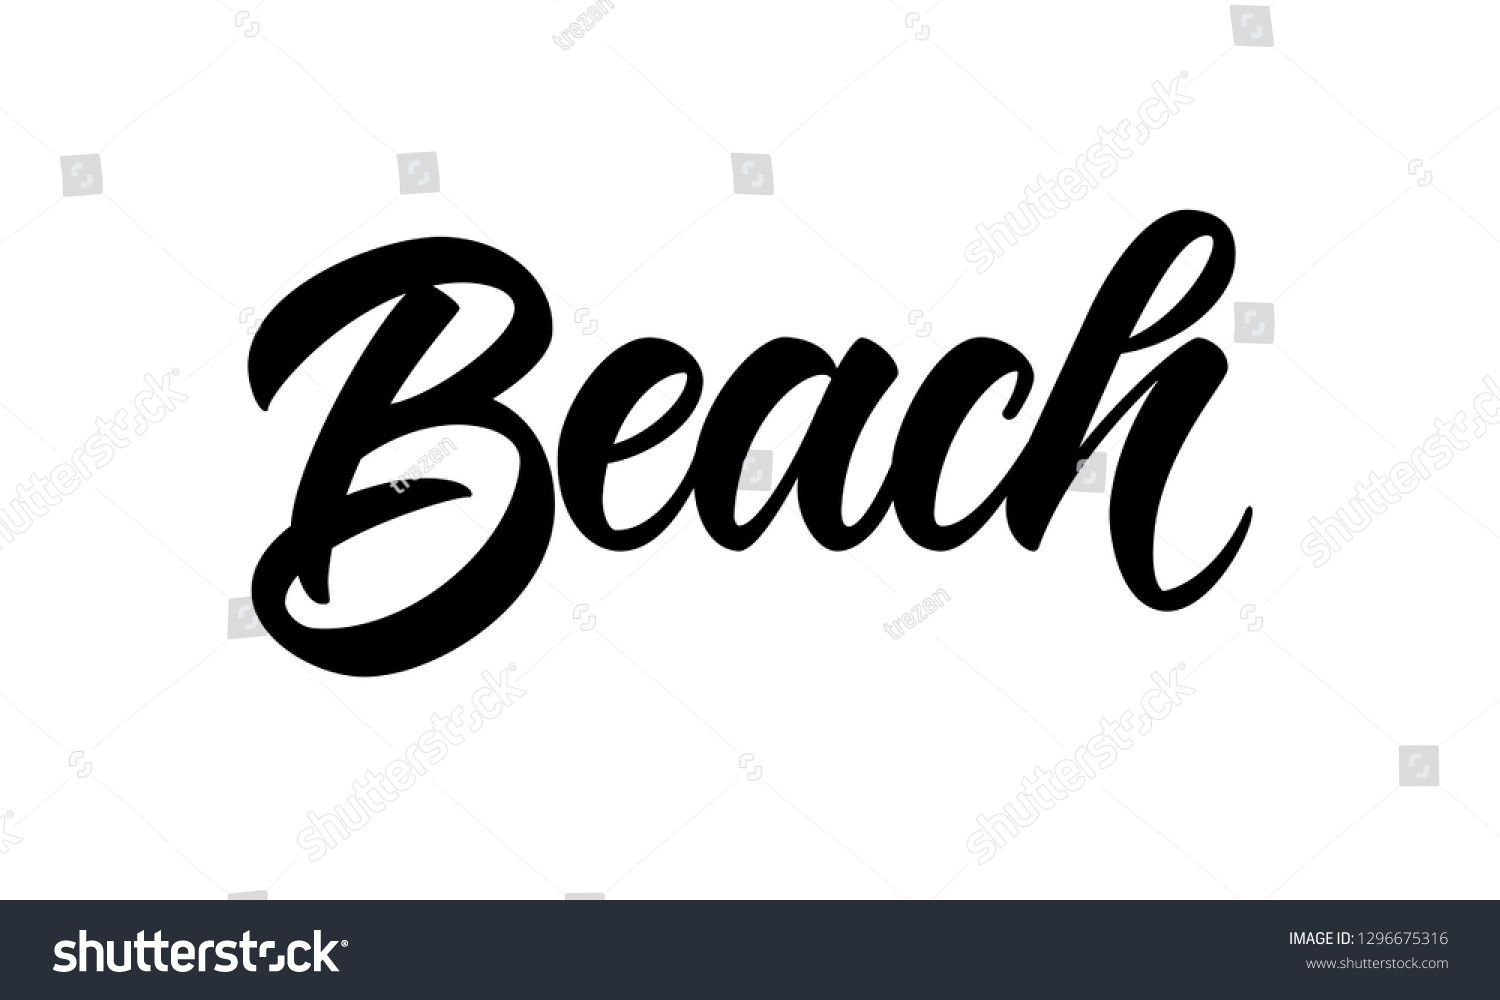 beach-word-lettering-vector-illustration-simple